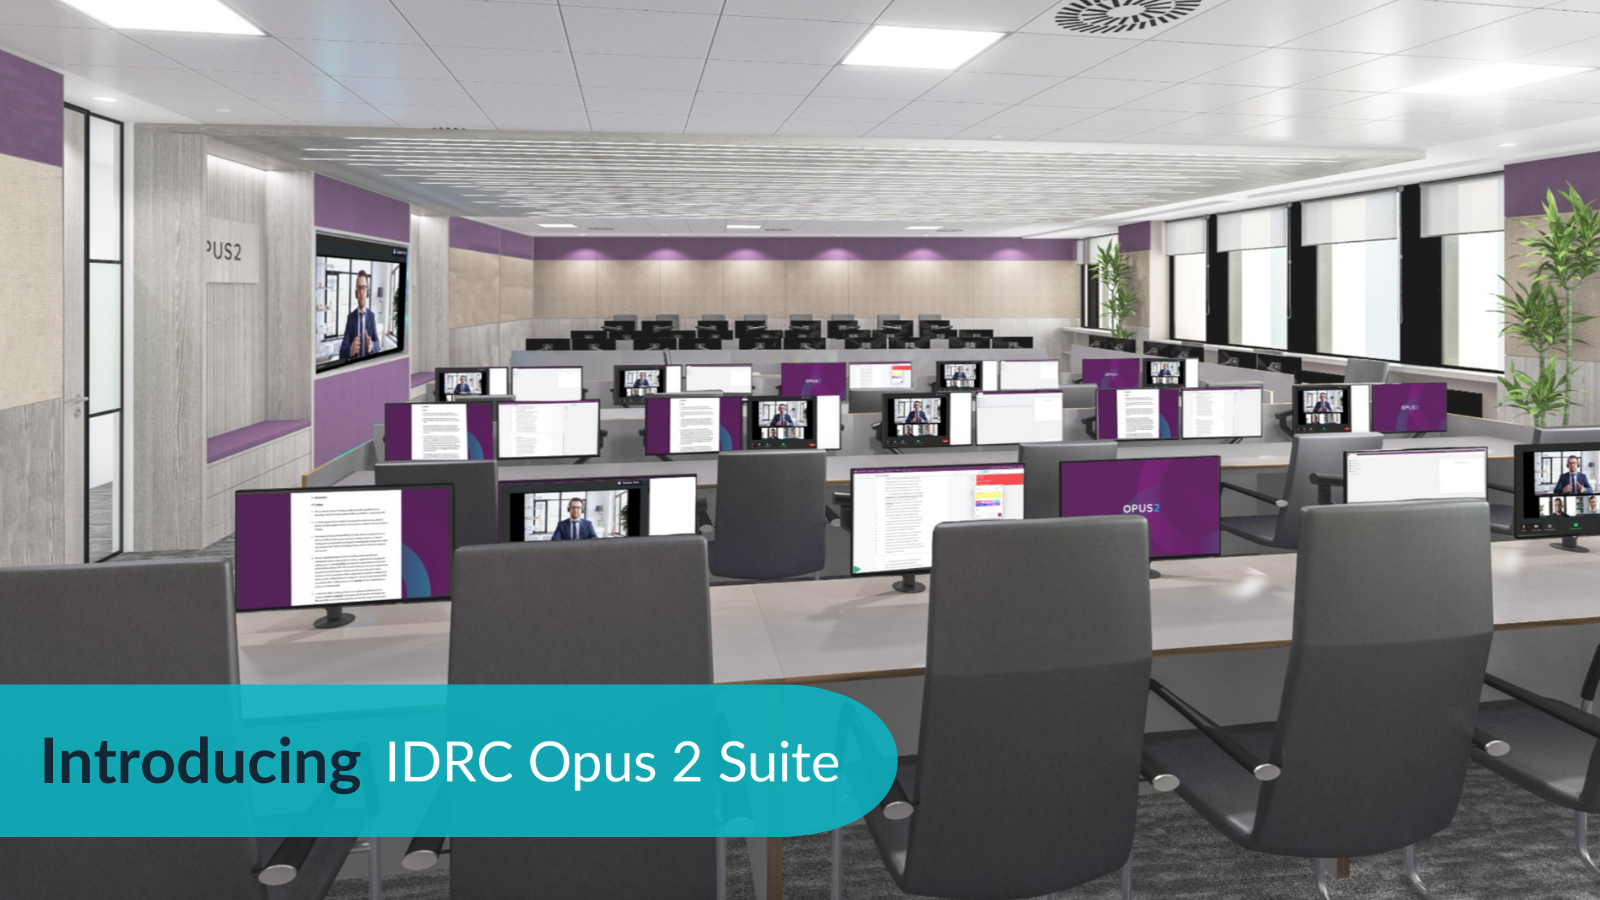 IDRC and Opus 2 launch state-of-the-art flagship hearing room